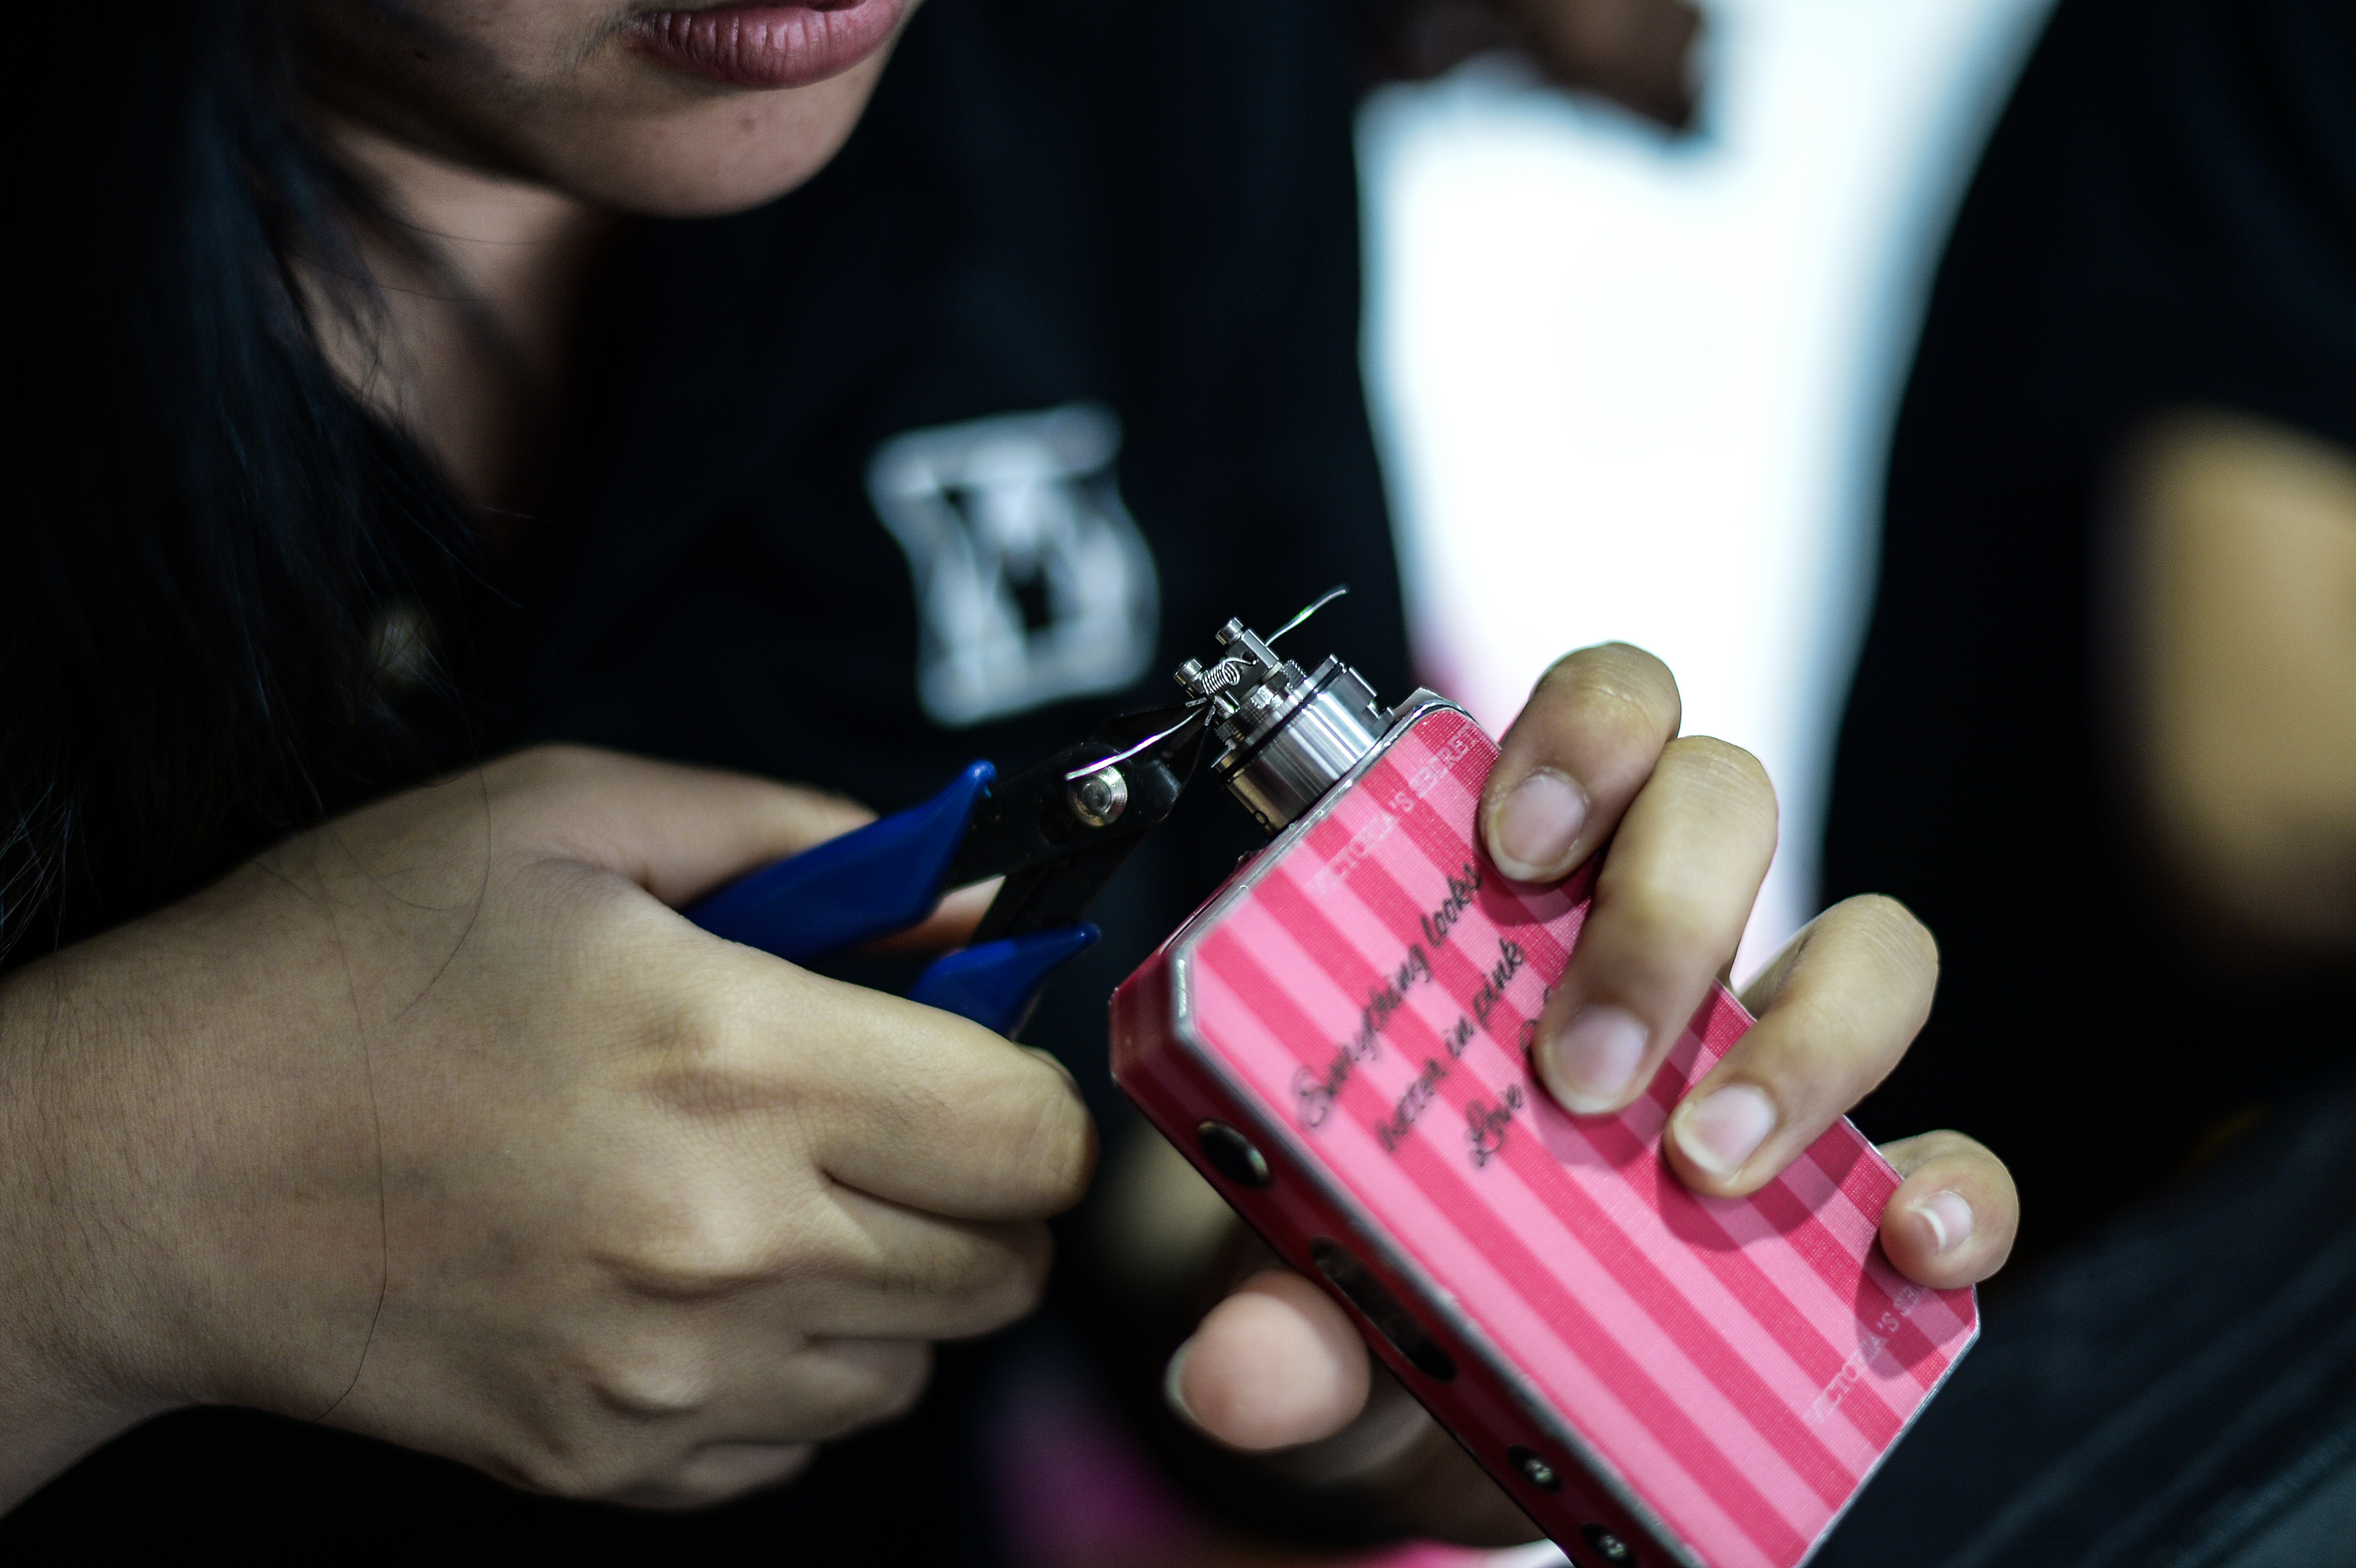 TO GO WITH Lifestyle-Malaysia-e-cigarette-tobacco-health,FEATURE by Satish Cheney This picture taken on November 19, 2015 shows a worker inspecting a coil, the metal heating element in an e-cigarette that produces vapour from e-juices, at a vape shop in Kuala Lumpur. Vaping" is soaring in popularity in Malaysia, the largest e-cigarette market in the Asia-Pacific region, but authorities are threatening to ban the habit in for health reasons -- a move that has sparked anger from growing legions of aficionados.     AFP PHOTO / MOHD RASFAN / AFP PHOTO / MOHD RASFAN